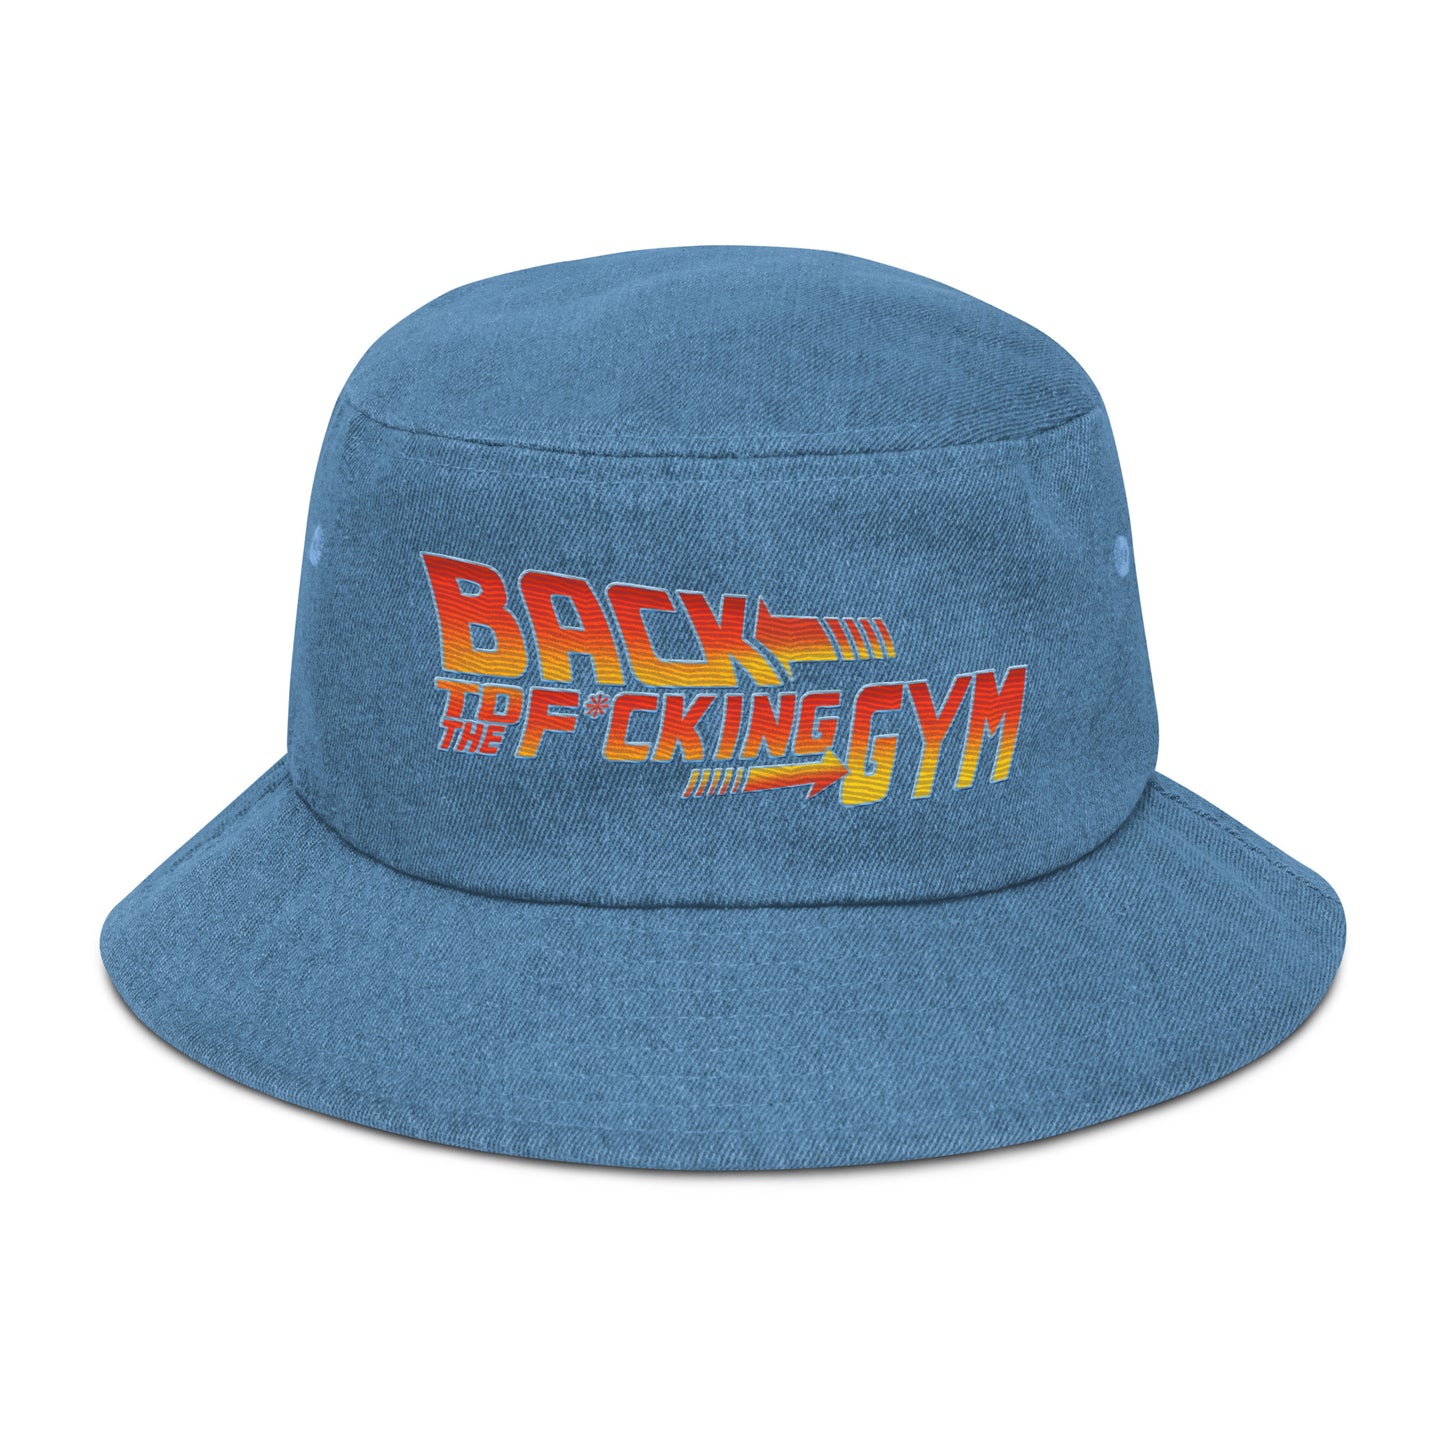 Back To The F*cking Gym (Text) Denim Bucket Hat